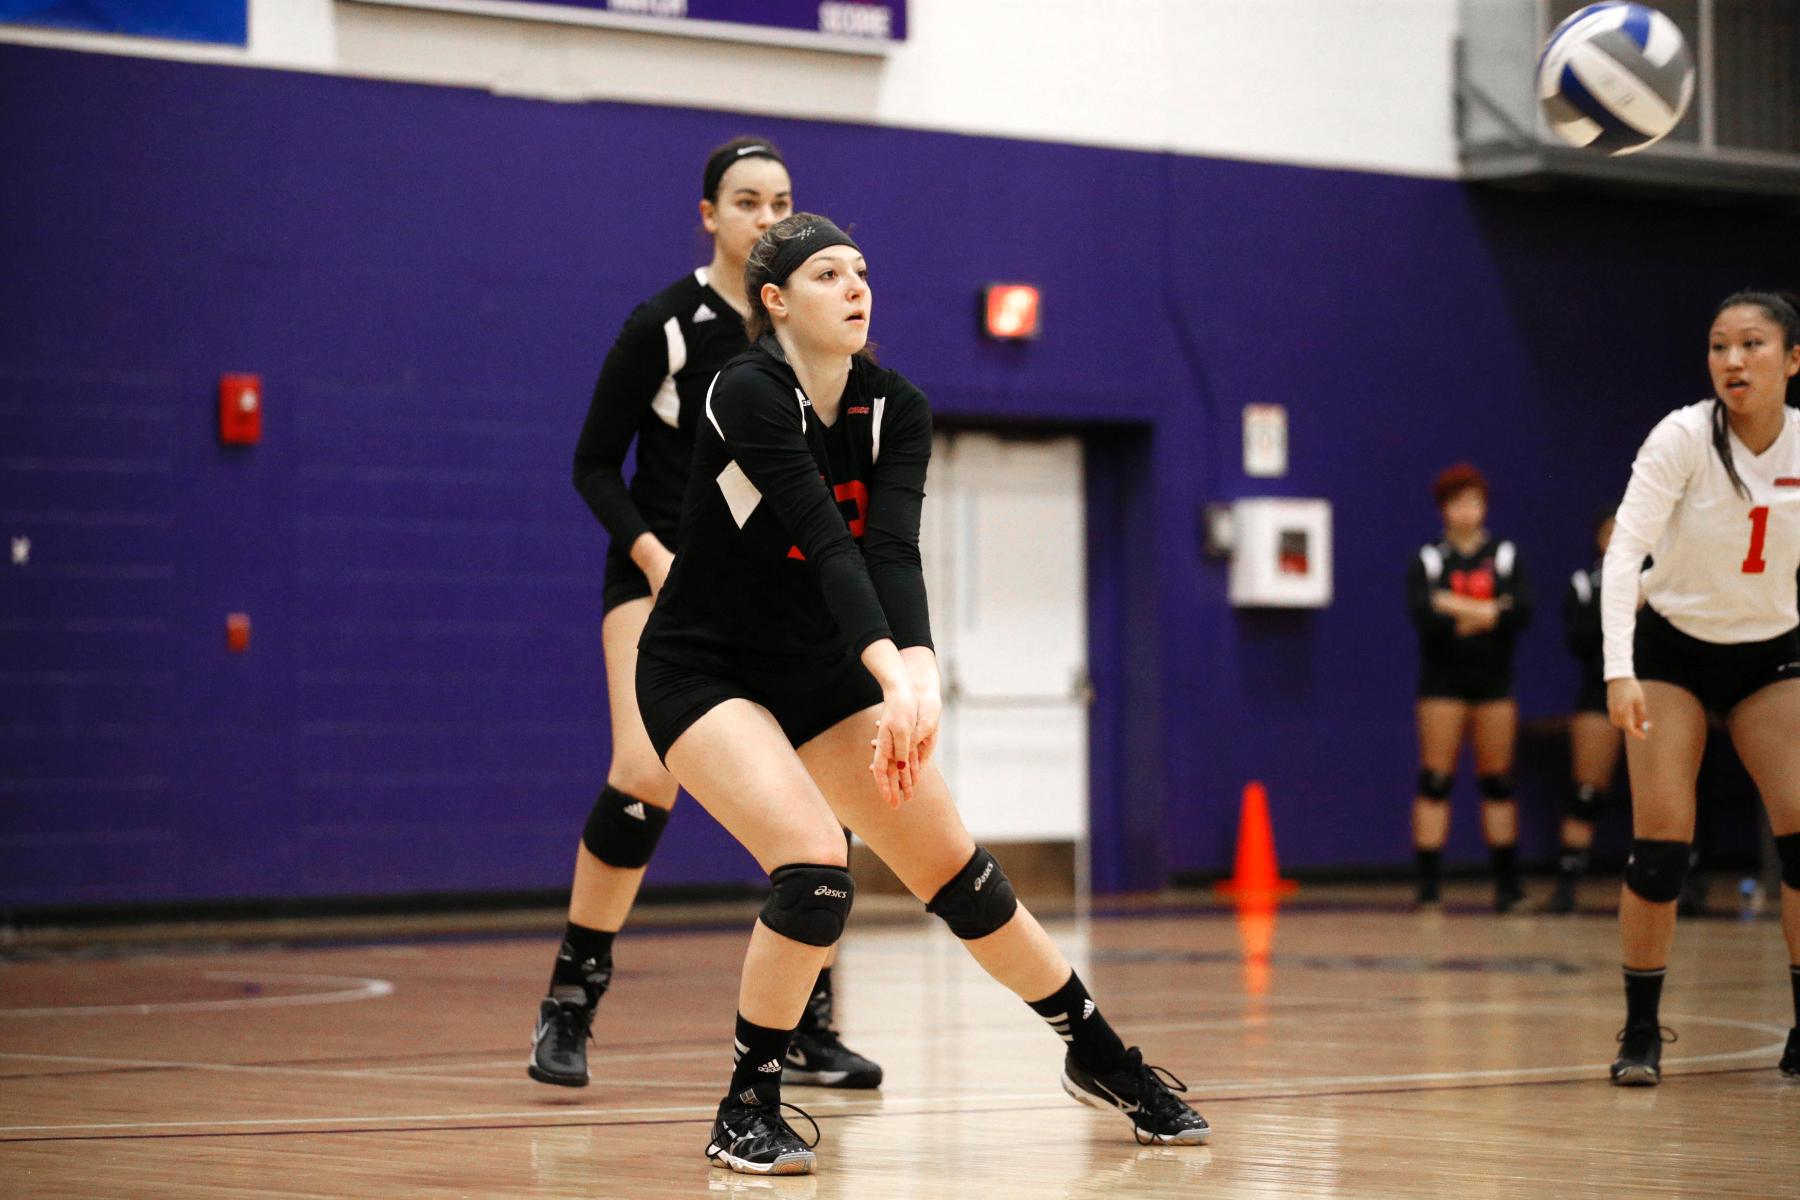 WOMEN'S VOLLEYBALL LOSE TO EAST STROUDSBURG UNIVERSITY